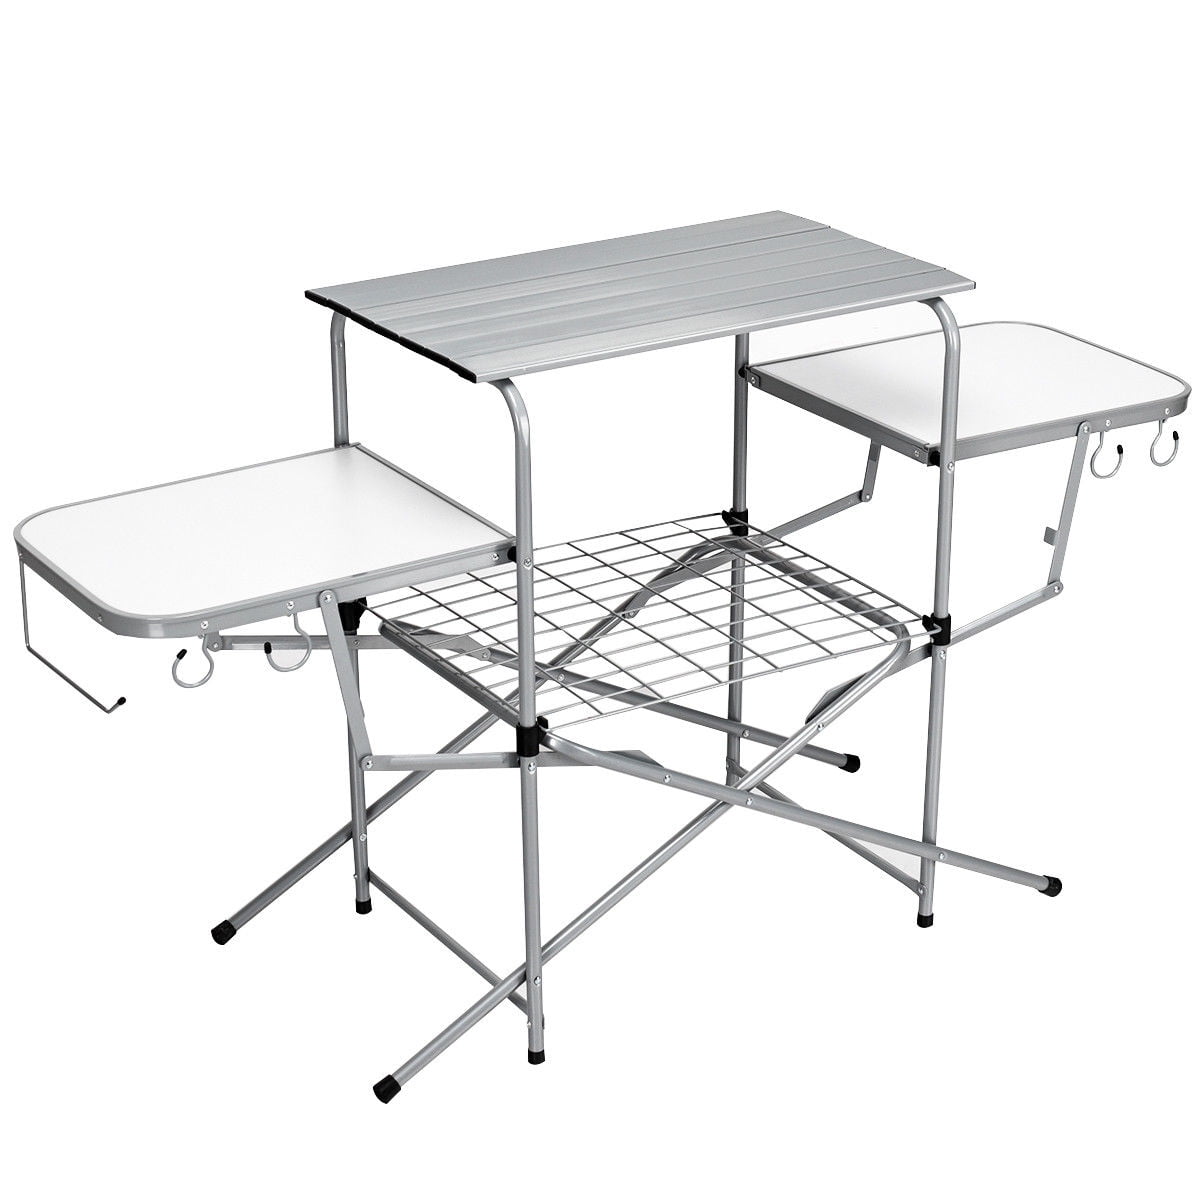 Camp Field Camping Table with Adjustable Legs for Beach, Backyards 